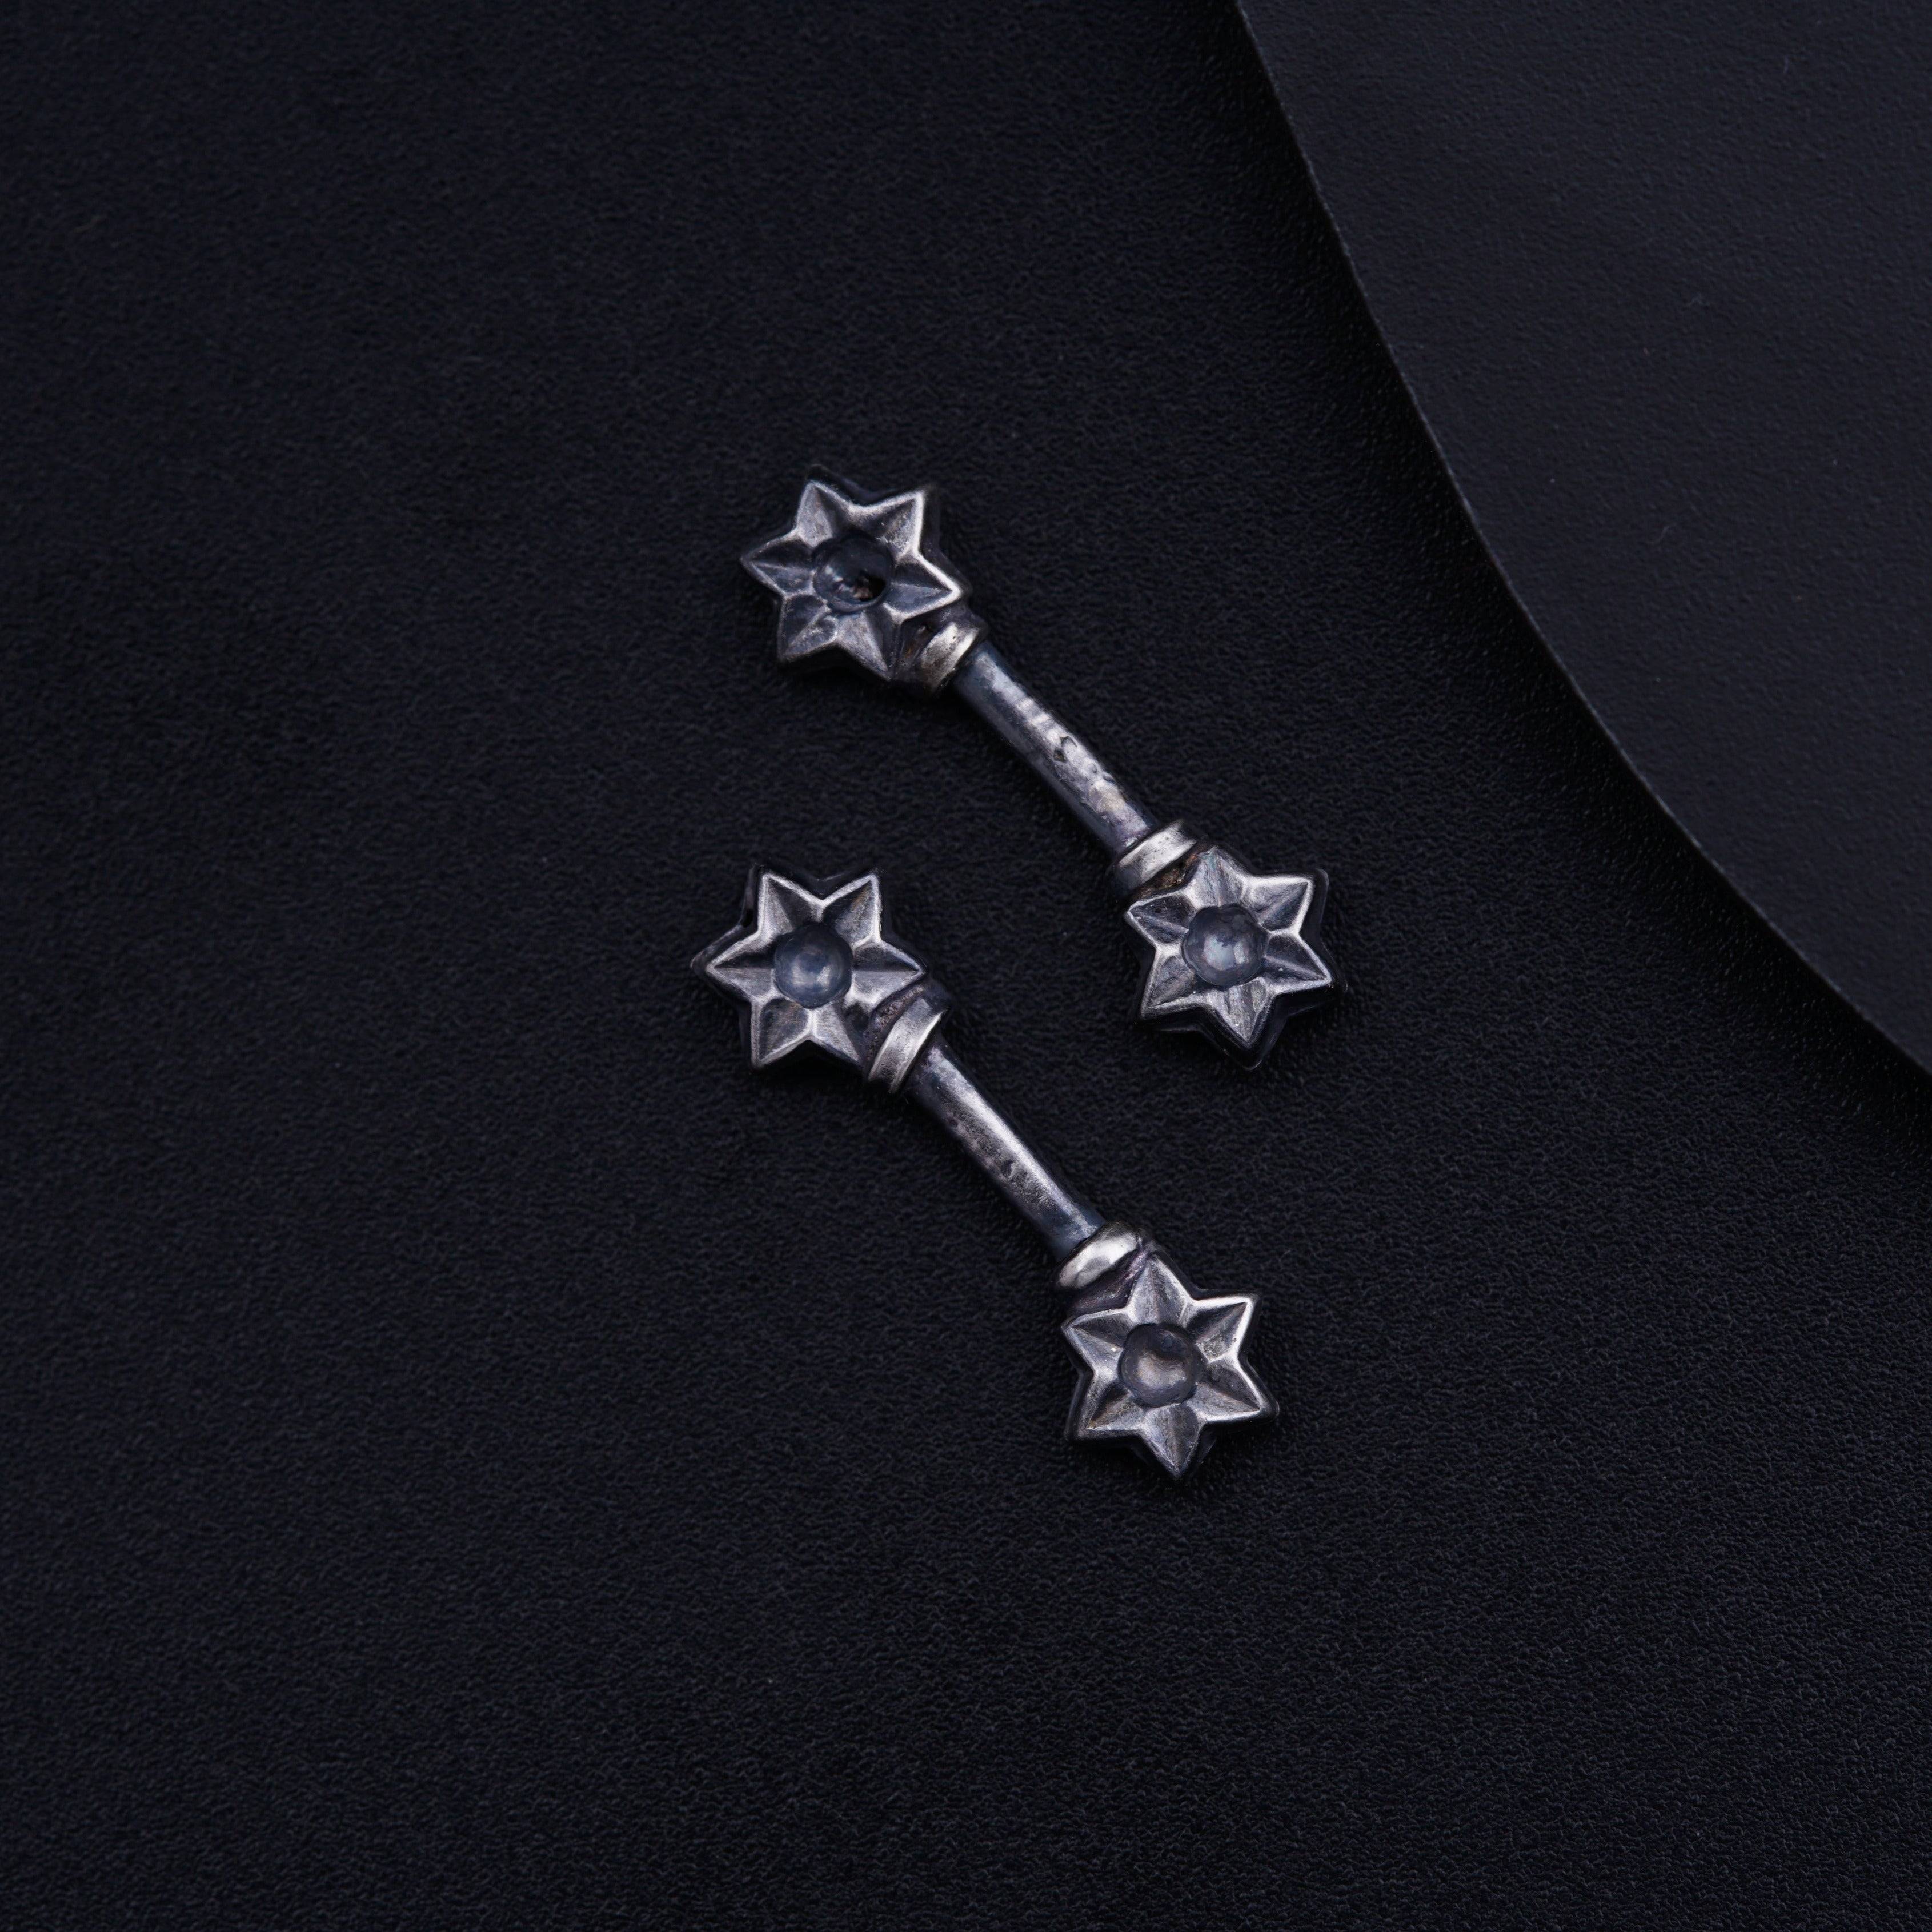 a pair of metal stars on a black background